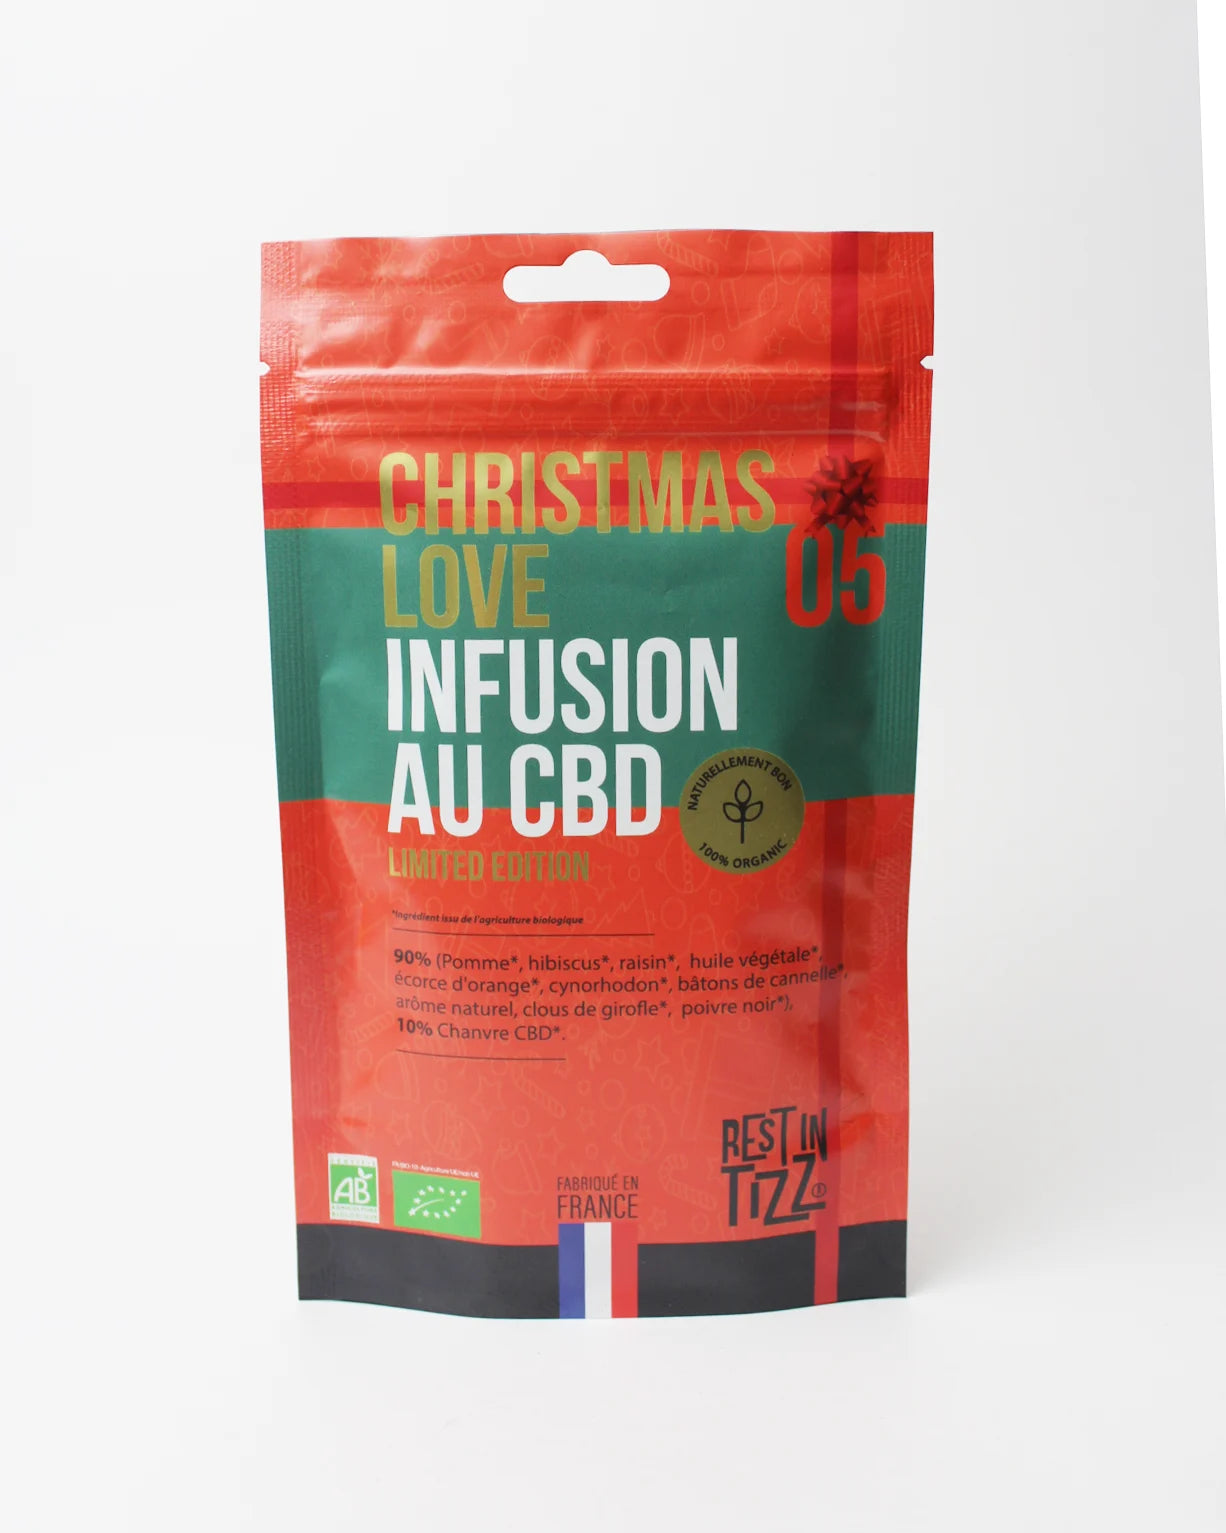 infusion CBD Christmas Love Noel Rest in Tizz